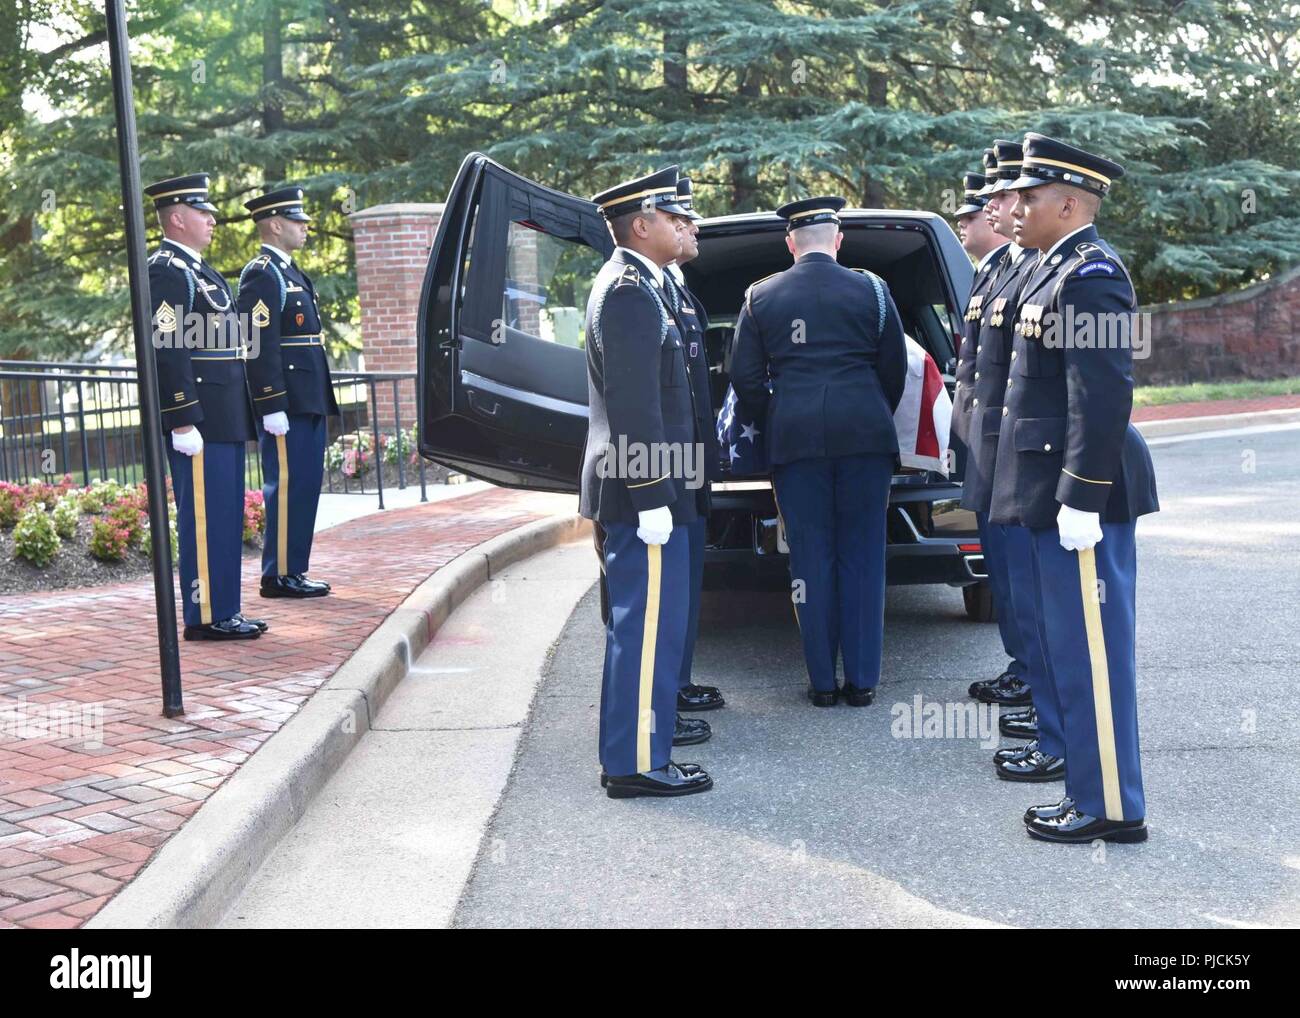 Soldiers with the 3rd Infantry Regiment (The Old Guard) carry the casket of Army Pfc. Walter W. Green, during his funeral at Arlington National Cemetery, July 20.  In November 1950, Green was a member of Company E, 2nd Battalion, 8th Cavalry Regiment, 1st Cavalry Division, participating in combat actions against the Chinese People’s Volunteer Forces (CPVF) in the vicinity of Unsan, North Korea.  Green, 18, of Zanesville, Ohio, was reported missing in action as of Nov. 2, 1950 when he could not be accounted for by his unit.  He was recently identified through DNA and anthropological analysis by Stock Photo